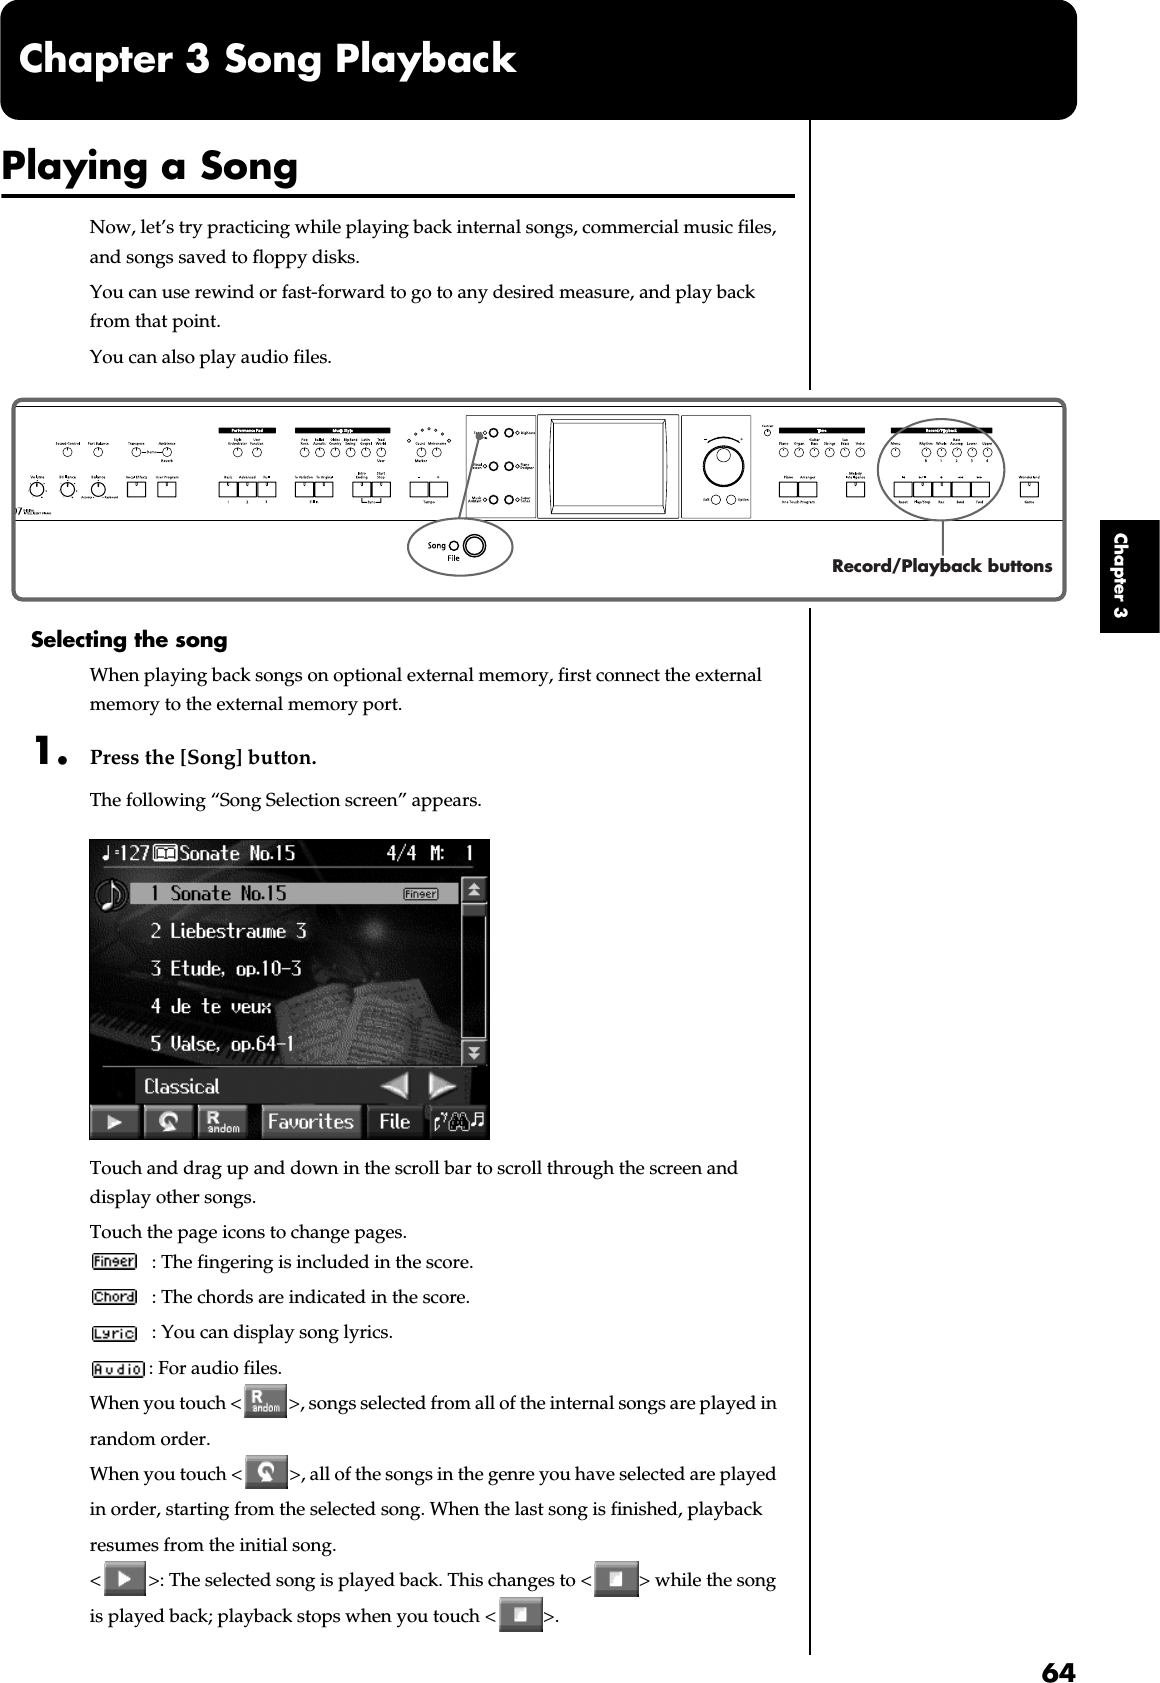 64Chapter 3Chapter 3 Song PlaybackPlaying a SongNow, let’s try practicing while playing back internal songs, commercial music files, and songs saved to floppy disks.You can use rewind or fast-forward to go to any desired measure, and play back from that point.You can also play audio files.fig.panel3-1Selecting the songWhen playing back songs on optional external memory, first connect the external memory to the external memory port.1. Press the [Song] button.The following “Song Selection screen” appears.fig.d-songsel.eps_60Touch and drag up and down in the scroll bar to scroll through the screen and display other songs.Touch the page icons to change pages. : The fingering is included in the score.: The chords are indicated in the score.: You can display song lyrics.: For audio files.When you touch &lt; &gt;, songs selected from all of the internal songs are played in random order.When you touch &lt; &gt;, all of the songs in the genre you have selected are played in order, starting from the selected song. When the last song is finished, playback resumes from the initial song.&lt; &gt;: The selected song is played back. This changes to &lt; &gt; while the song is played back; playback stops when you touch &lt; &gt;.Record/Playback buttons